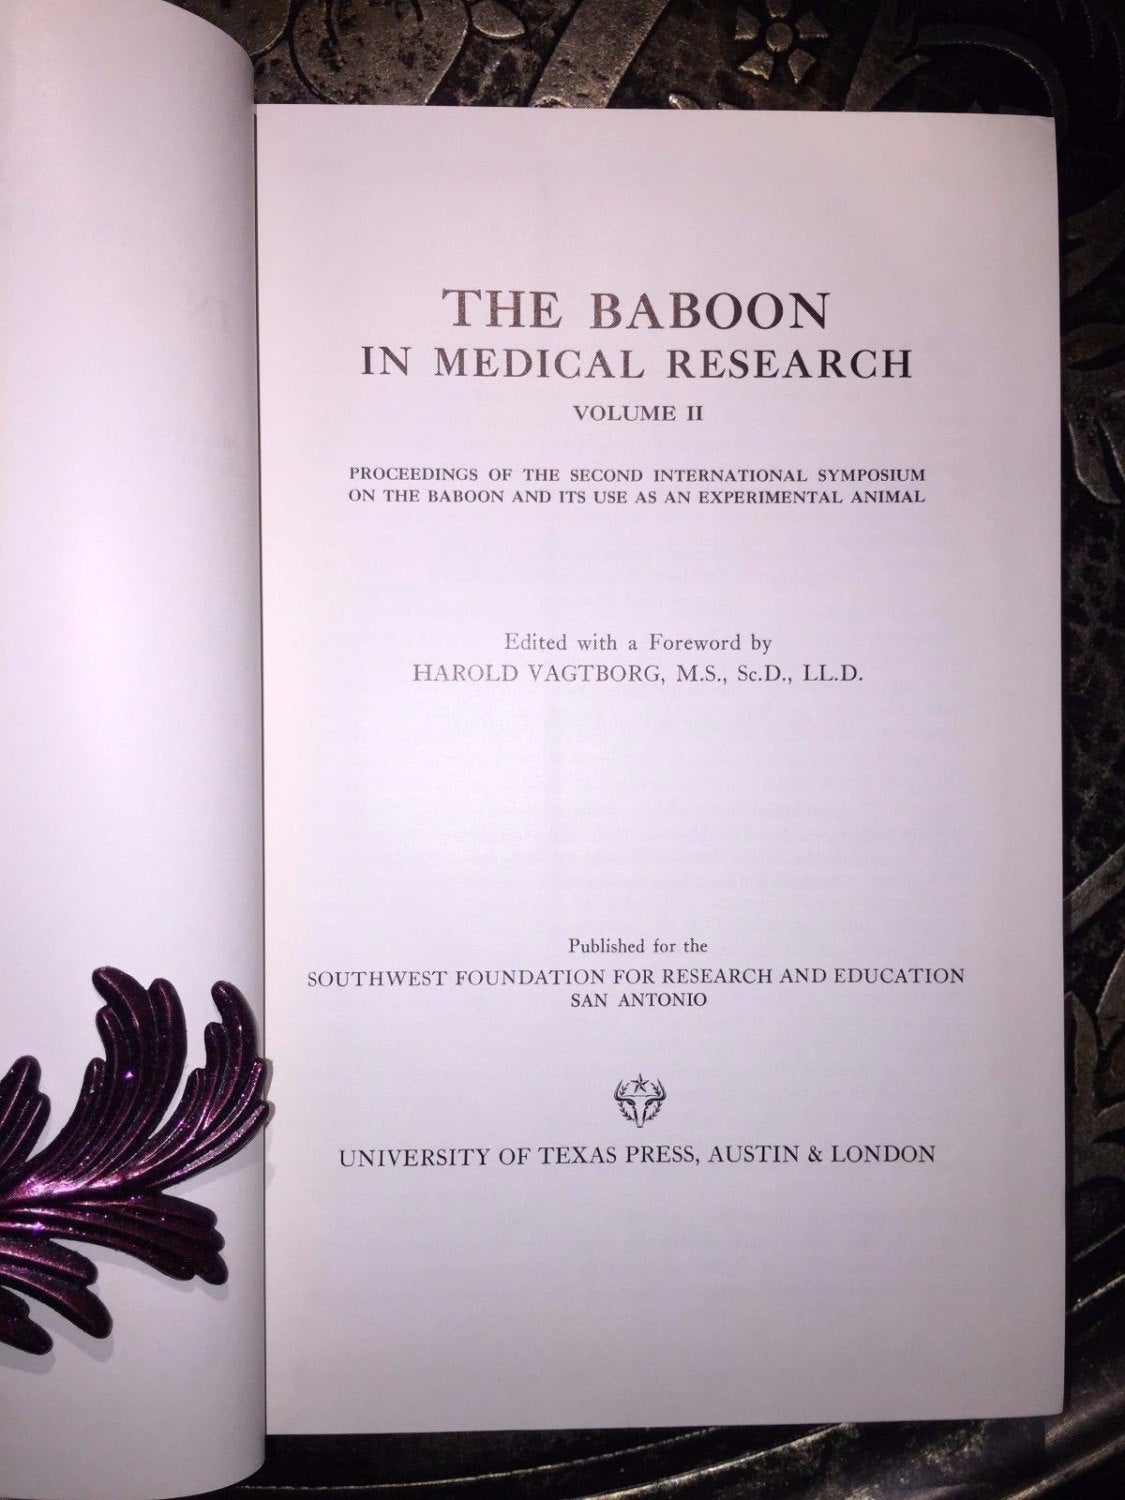 The Baboon in Medical Research, Vol I-II, Harold Vagtborg, 1965-7, Illustrated